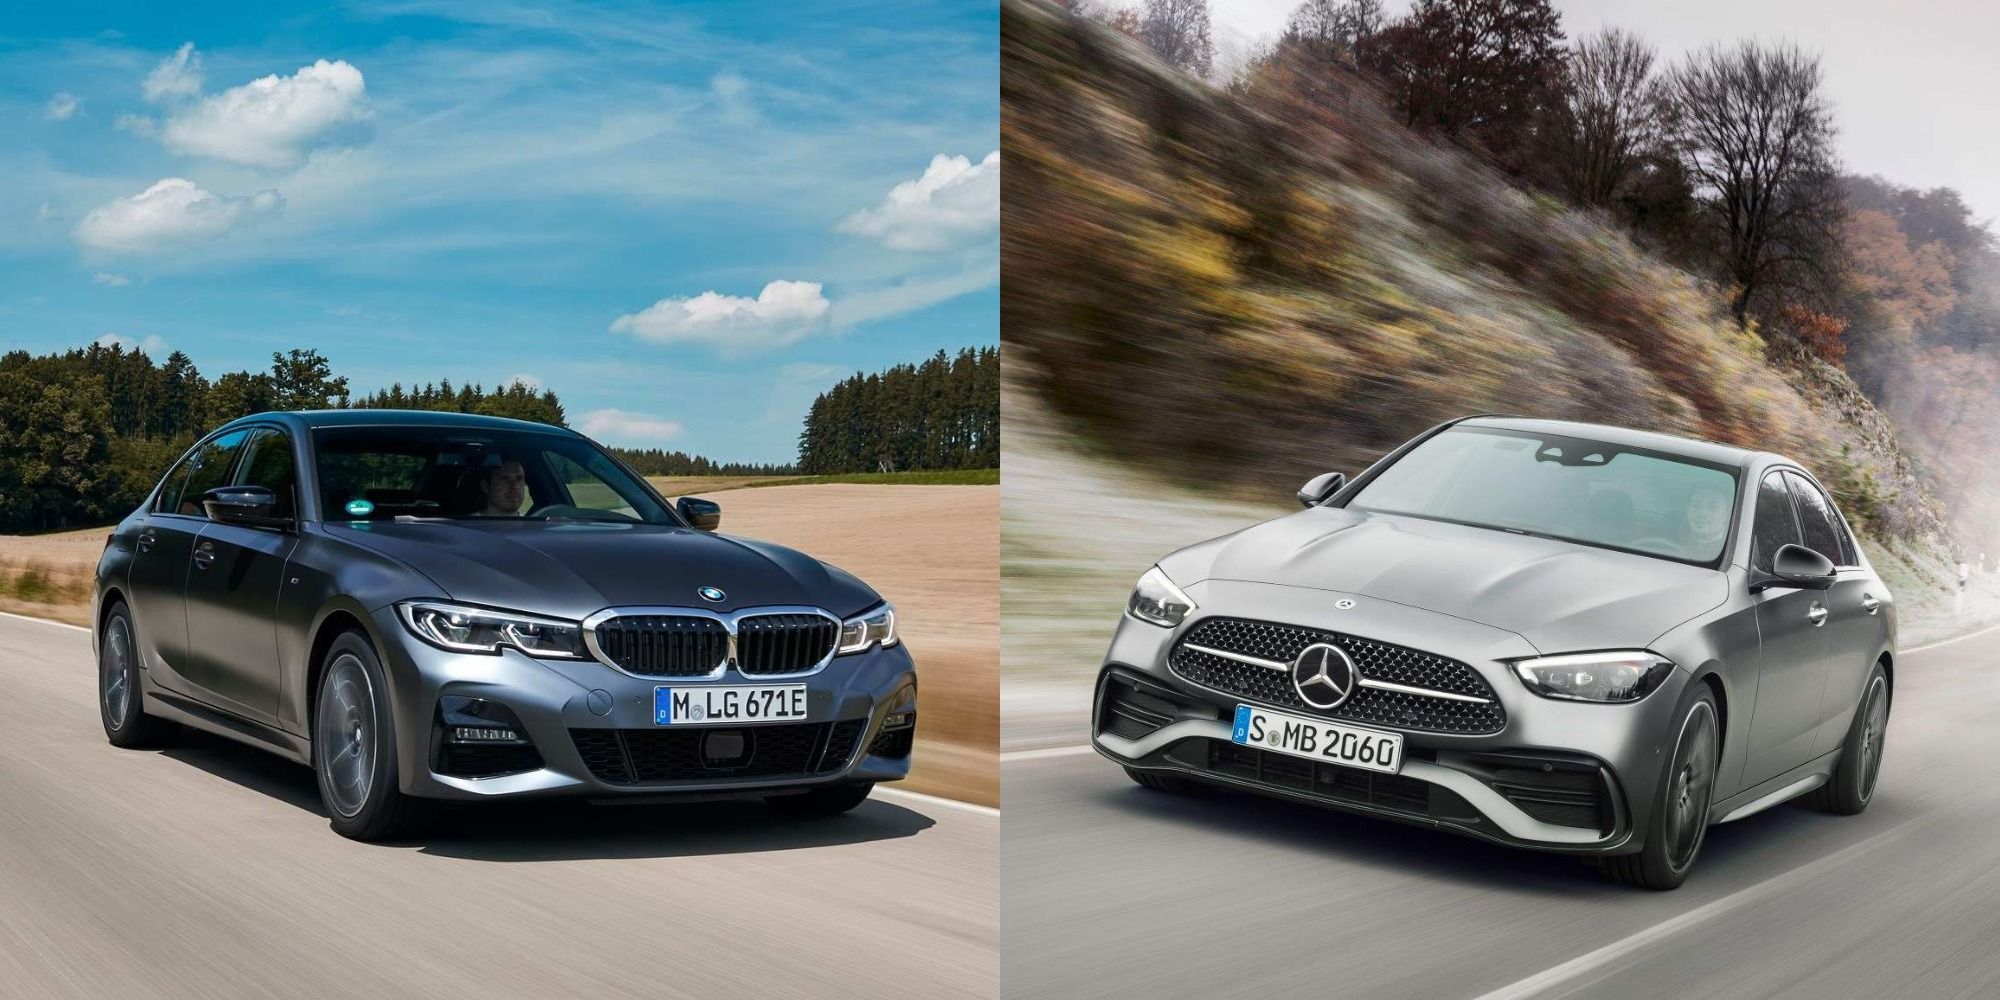 Mercedes-Benz C-Class vs BMW 3 Series: One is more modern than the other